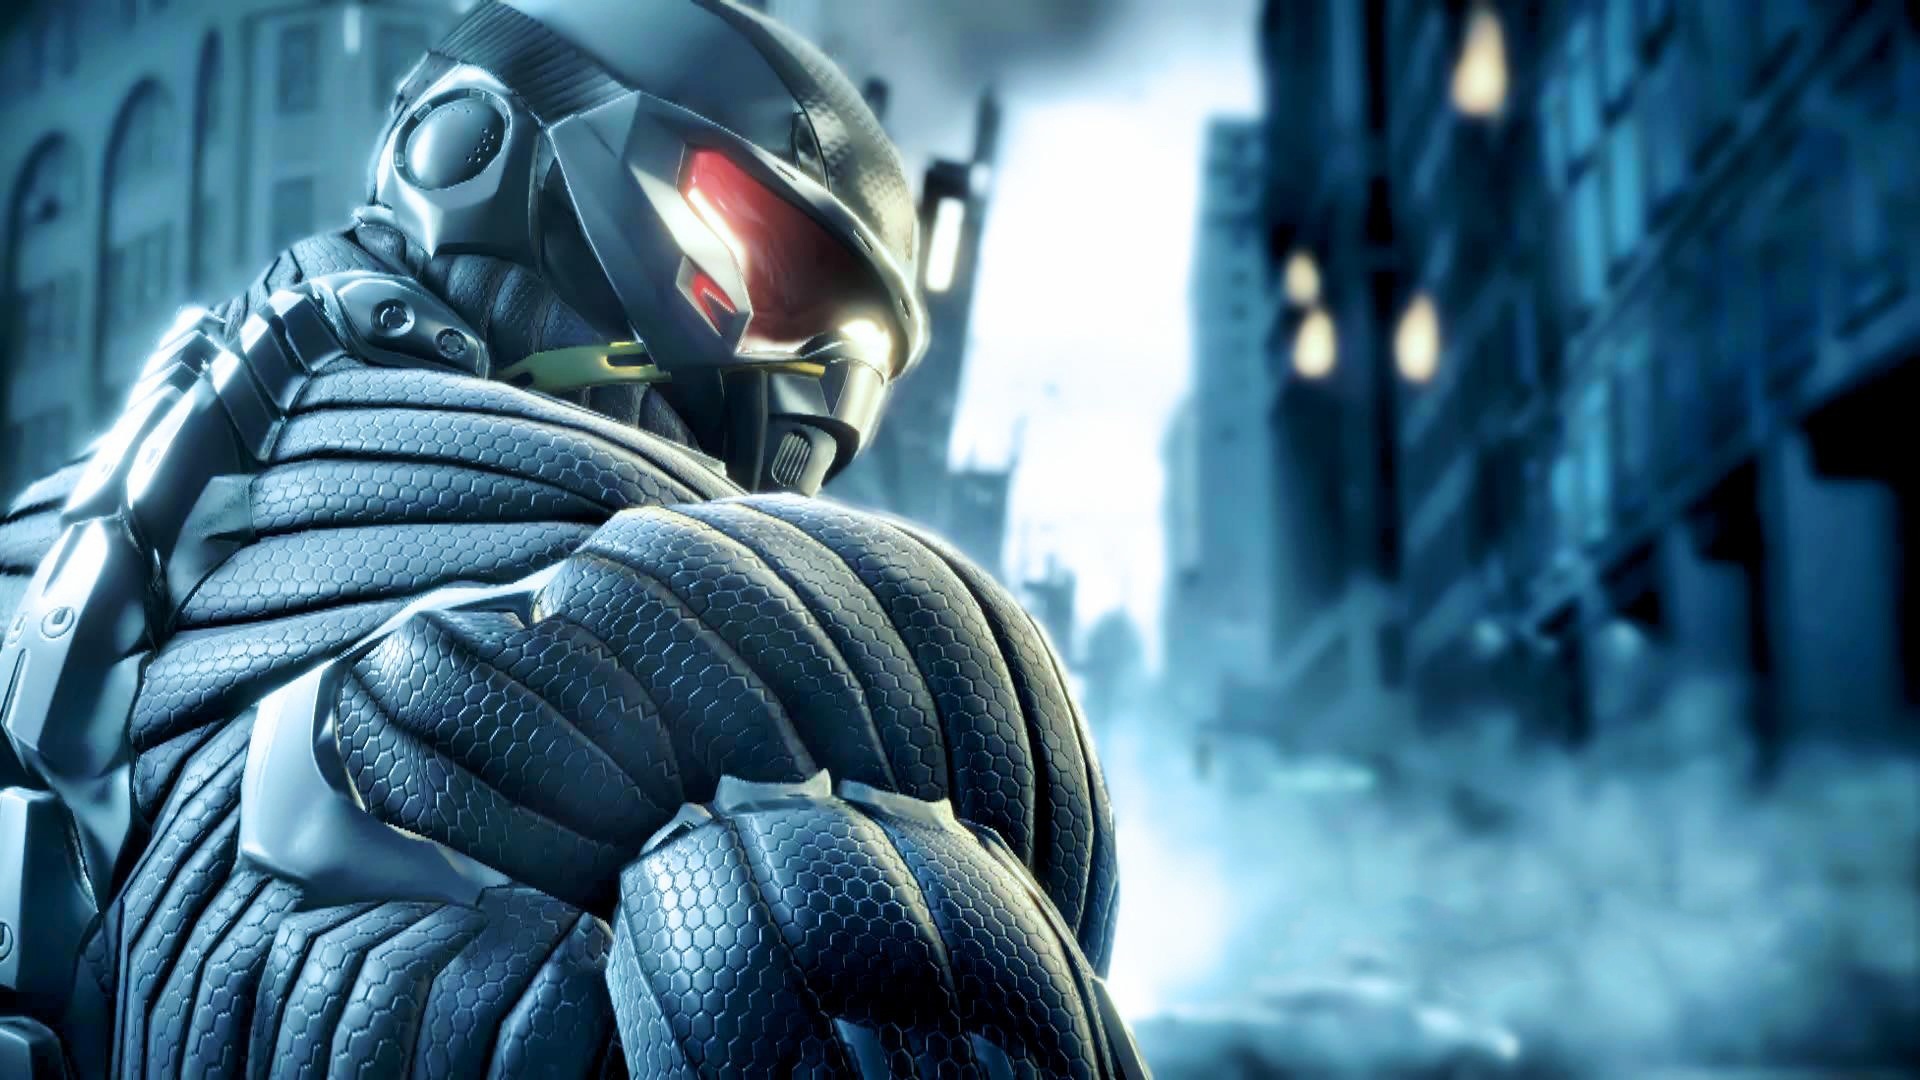 Crysis HD 1080p Wallpapers HD Wallpapers